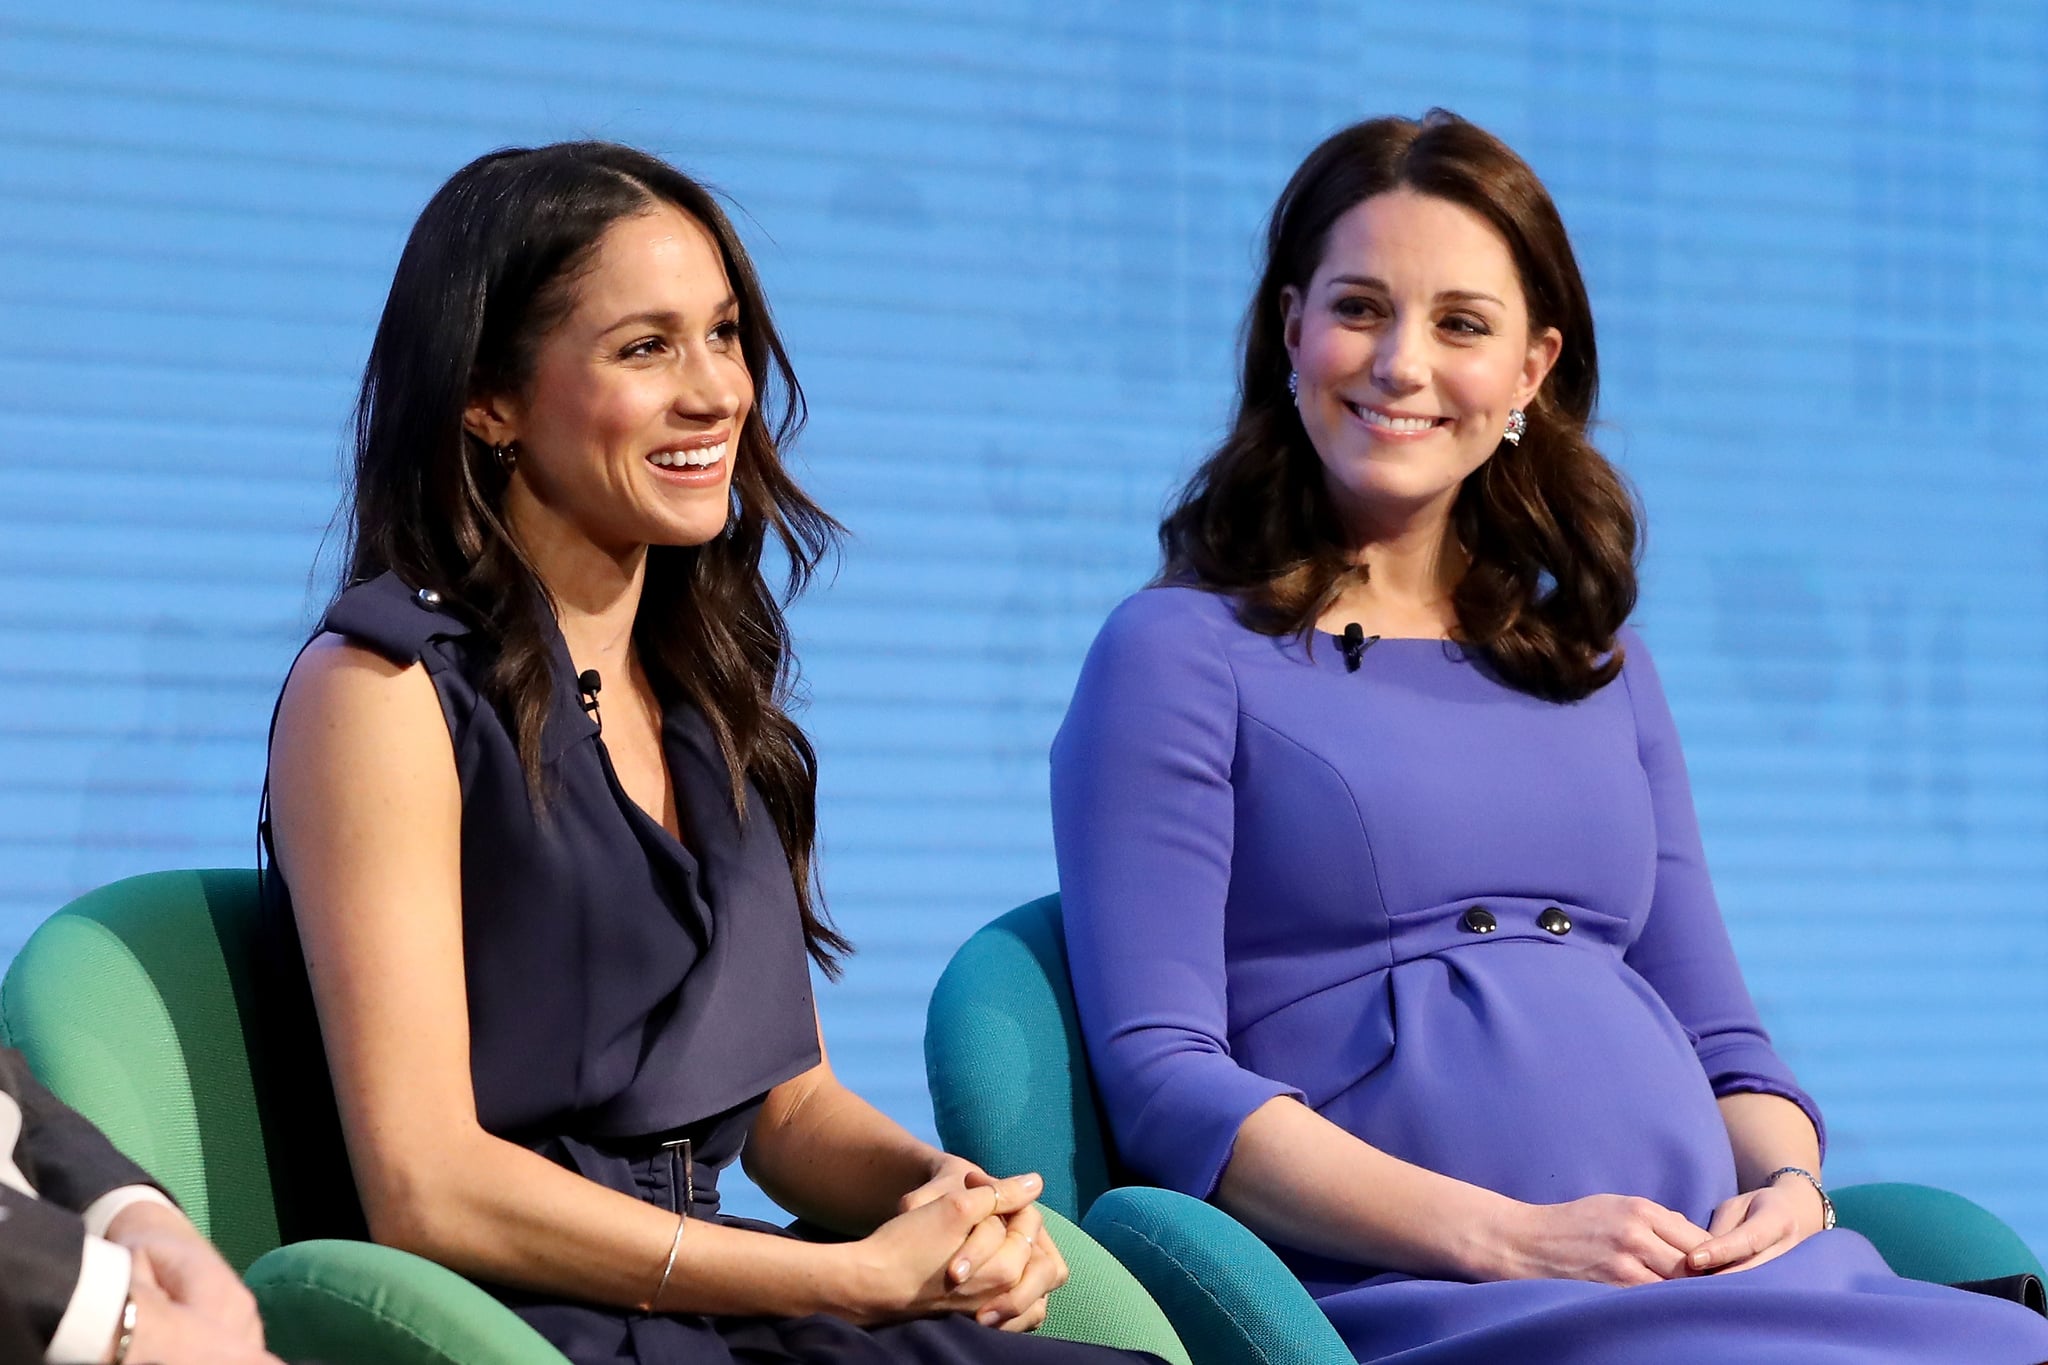 LONDON, ENGLAND - FEBRUARY 28:  (L-R) Meghan Markle and Catherine, Duchess of Cambridge attend the first annual Royal Foundation Forum held at Aviva on February 28, 2018 in London, England. Under the theme 'Making a Difference Together', the event will showcase the programmes run or initiated by The Royal Foundation.  (Photo by Chris Jackson - WPA Pool/Getty Images)